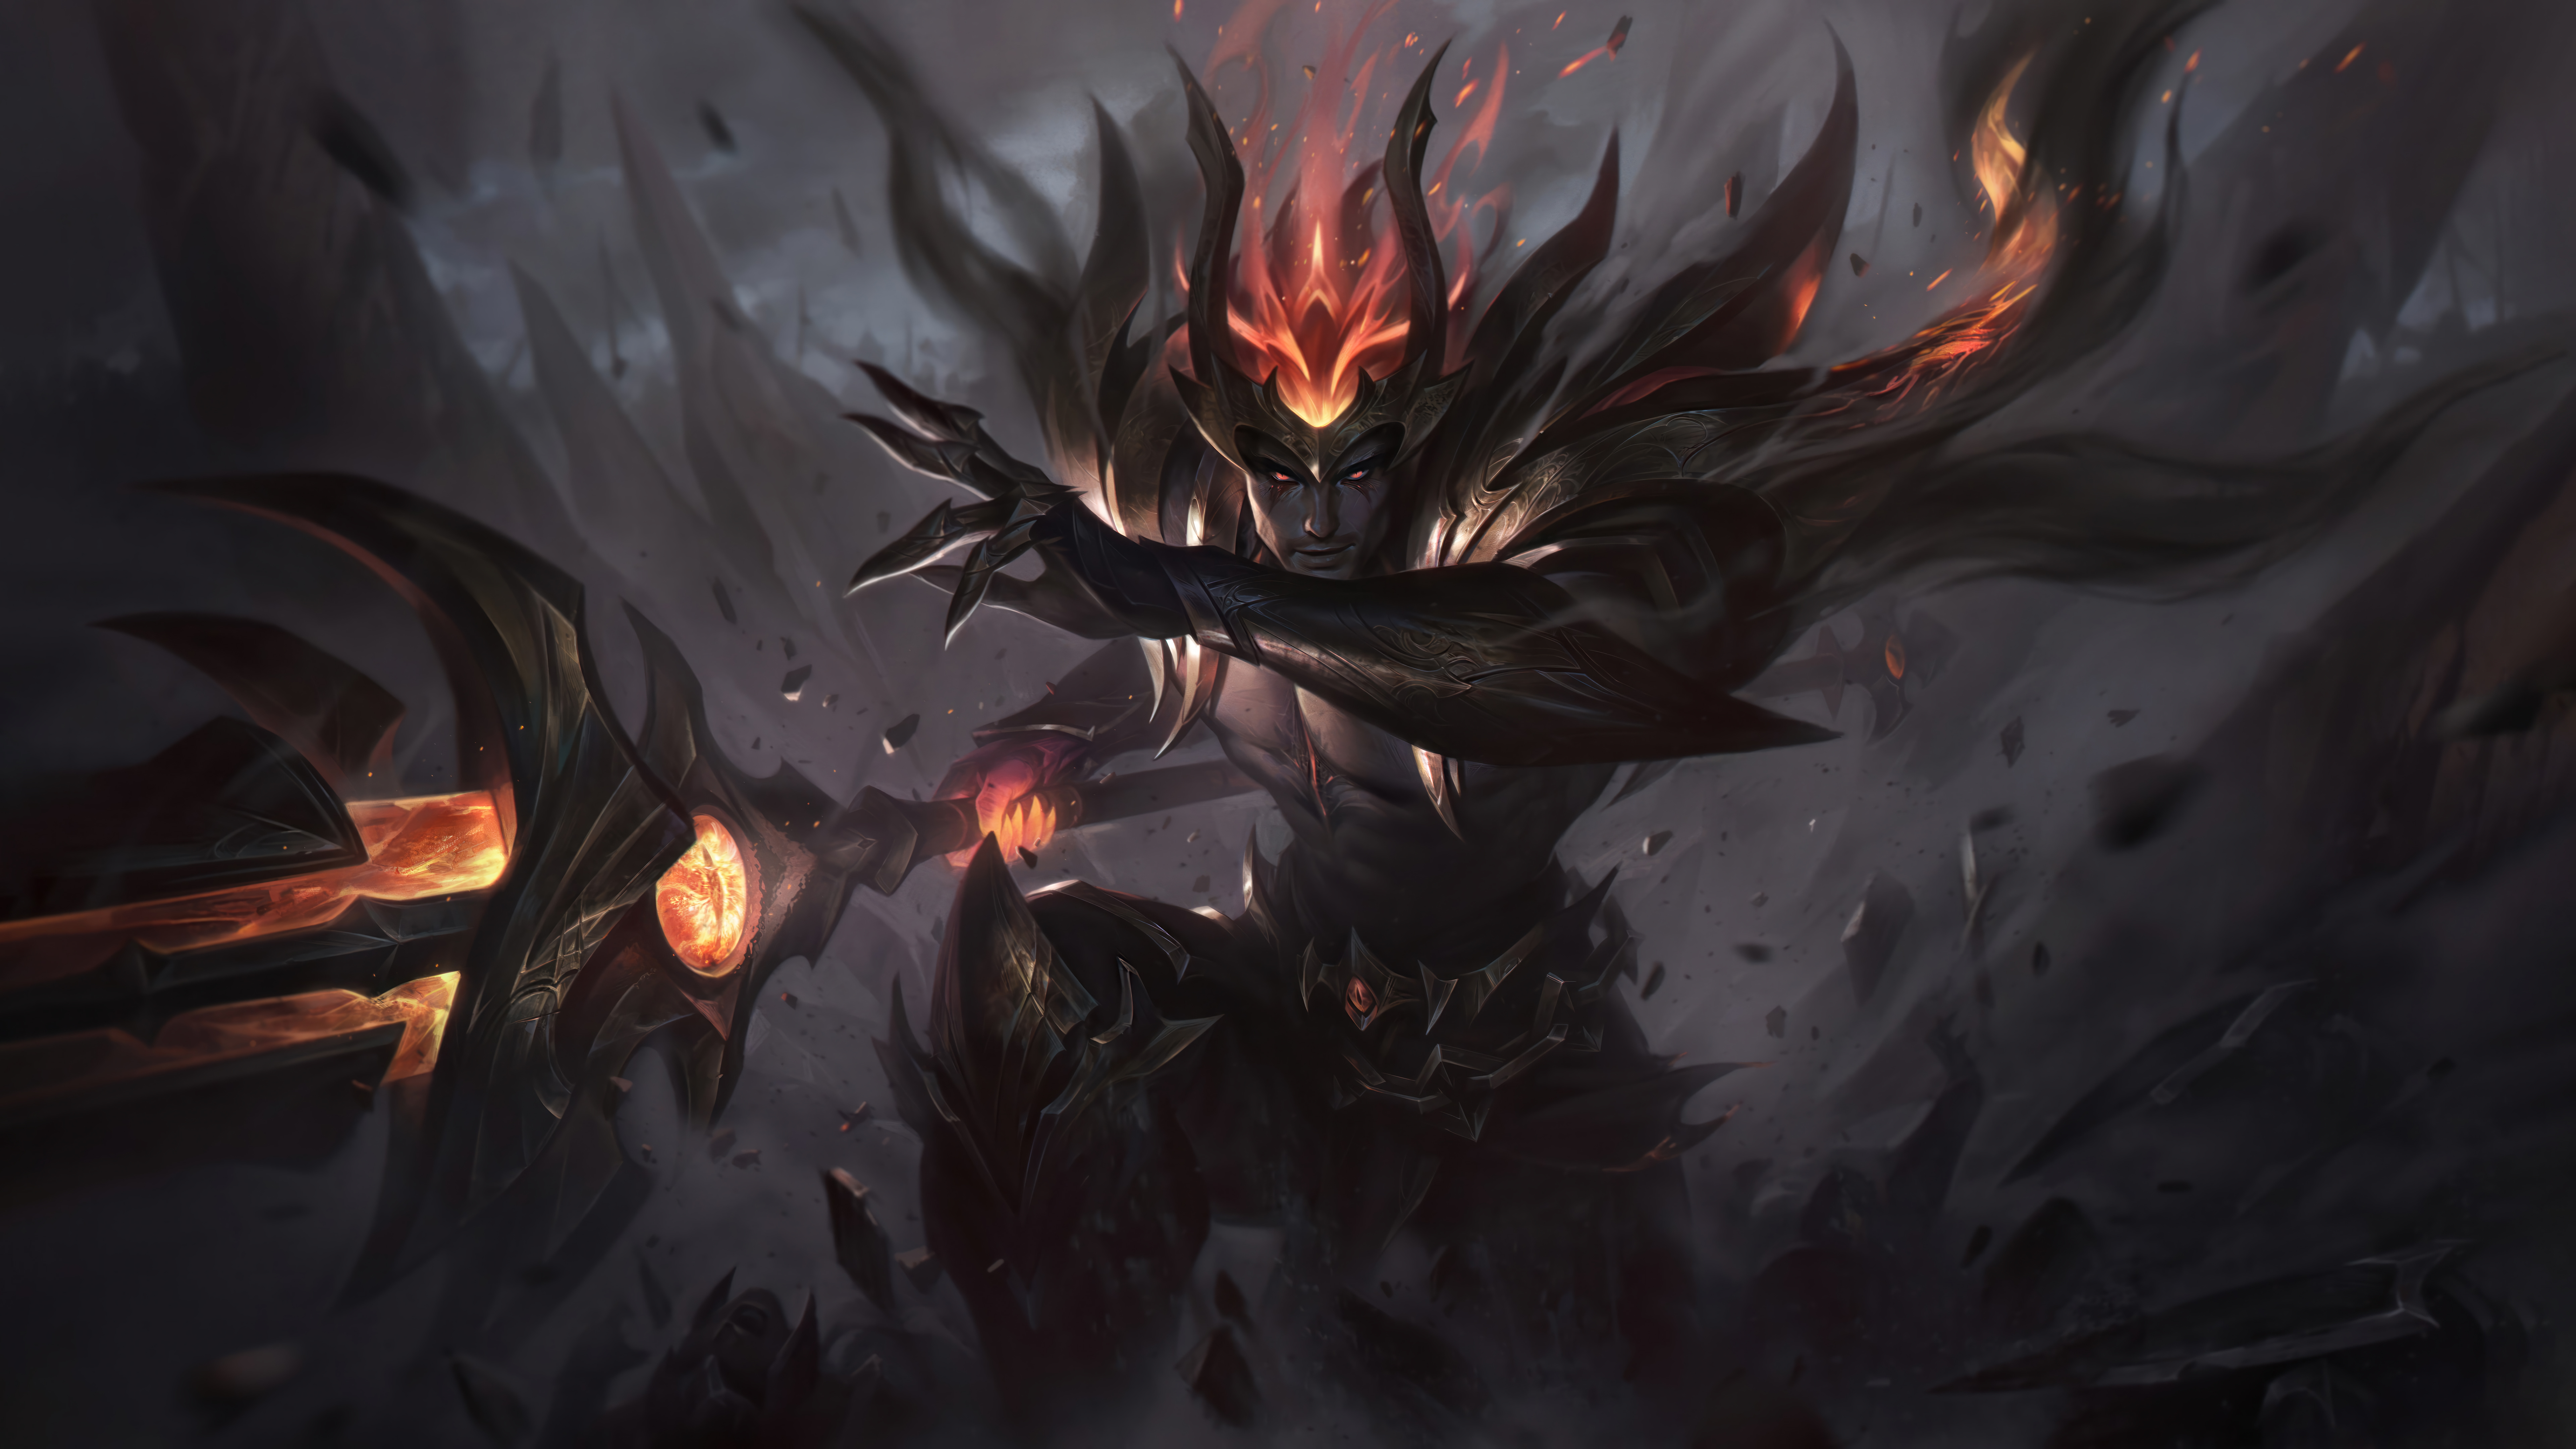 General 7680x4320 Herald of Chaos (League of Legends) Jarvan IV (League of Legends) League of Legends digital art Riot Games GZG 4K video games video game art video game characters weapon sword Dawnbringer & Nightbringer (League of Legends)